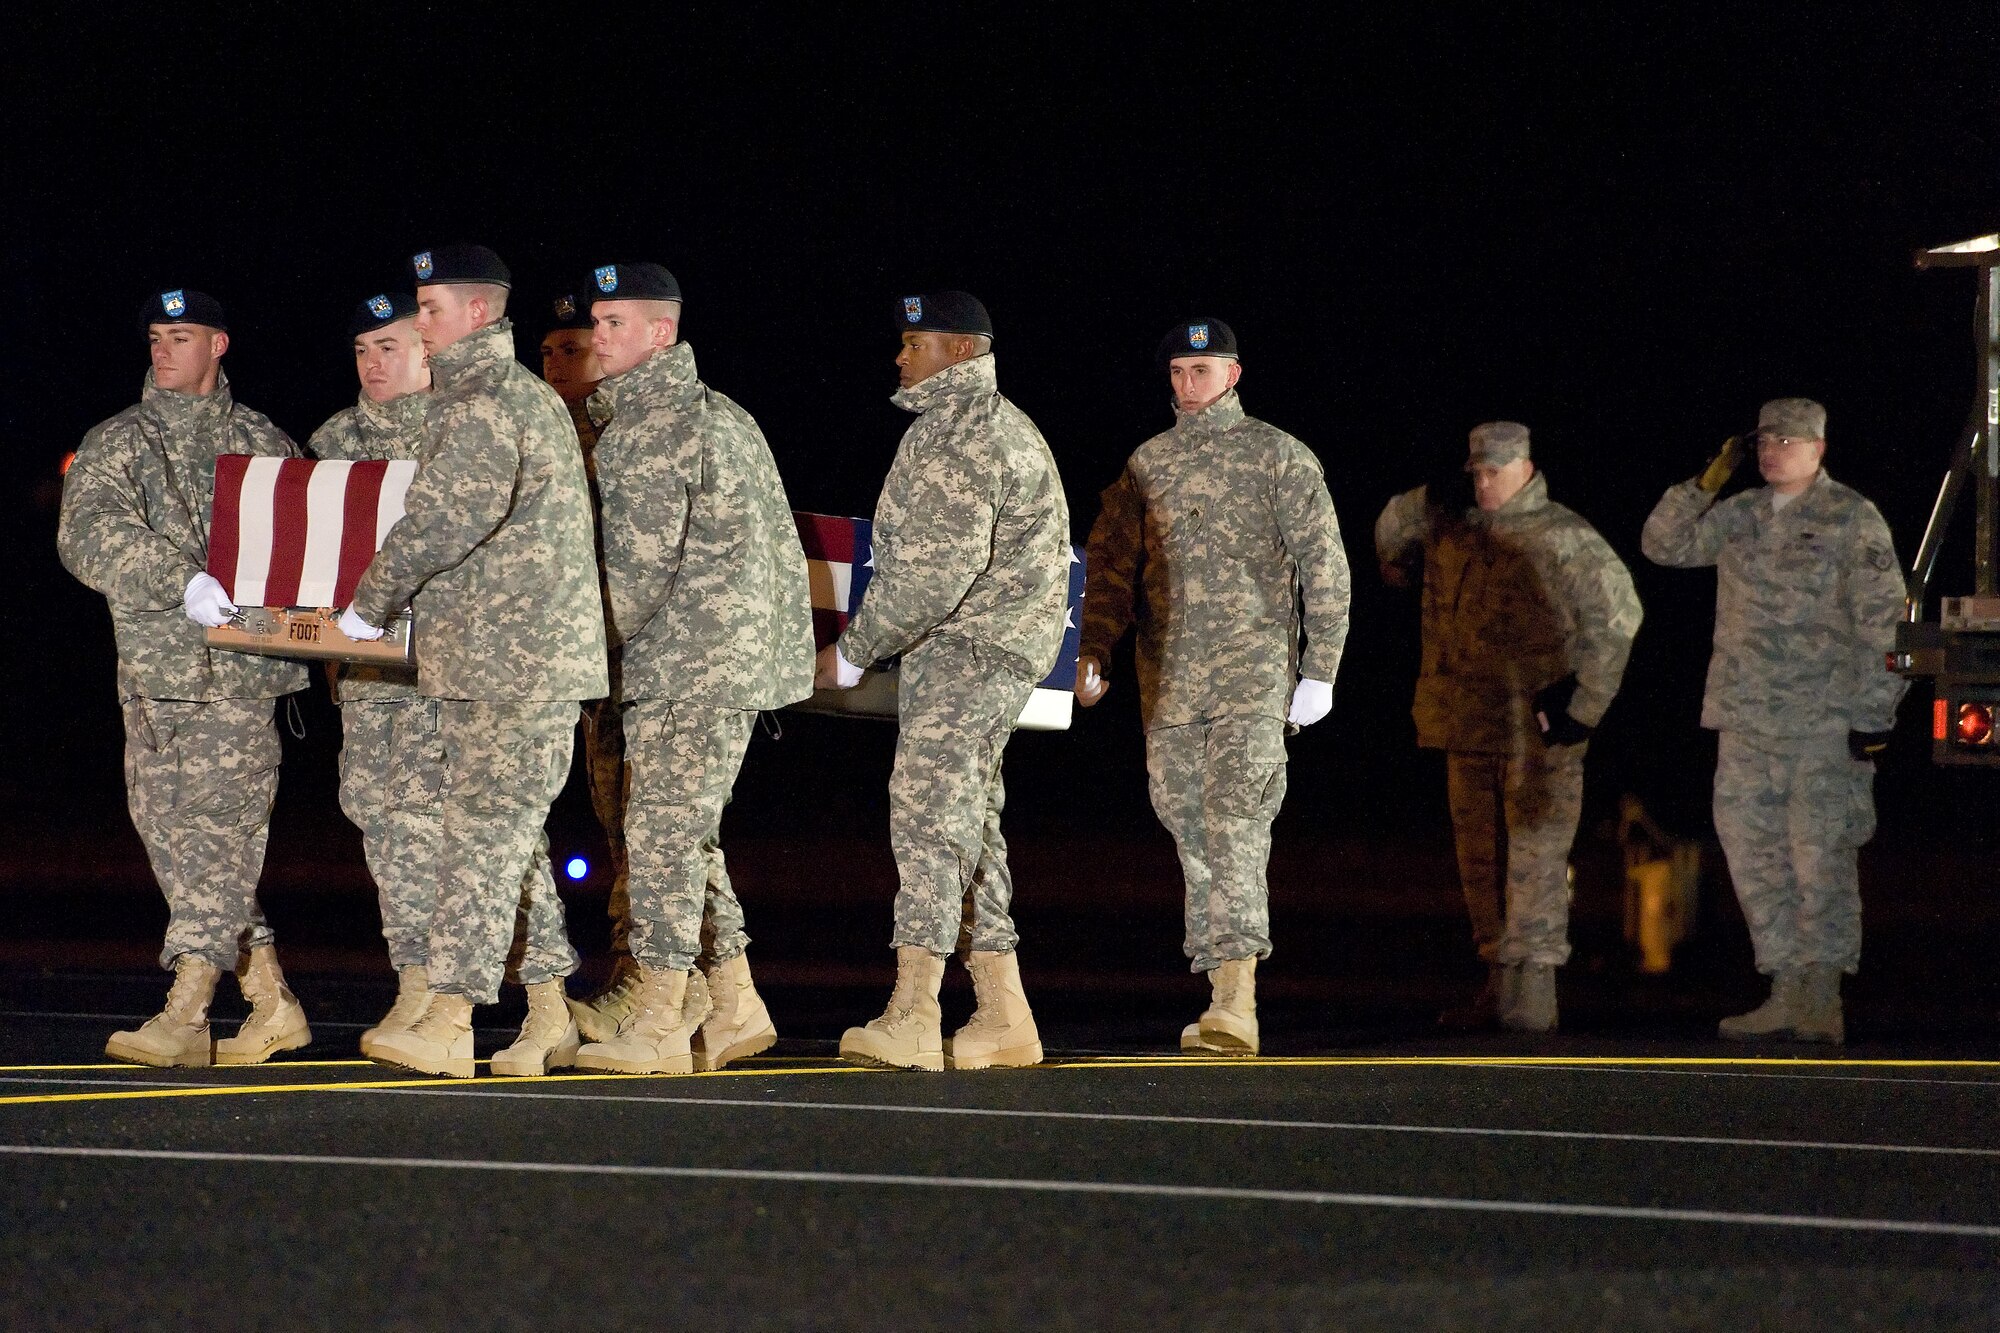 A U.S. Army carry team transfers the remains of Army Sgt. Maj. Wardell B.Turner of Nanticoke, Md., Nov. 26, 2014, at Dover Air Force Base, Del. Turner was assigned to Headquarters, United States Army Garrison, Fort Drum, N.Y. (U.S. Air Force photo/Roland Balik)